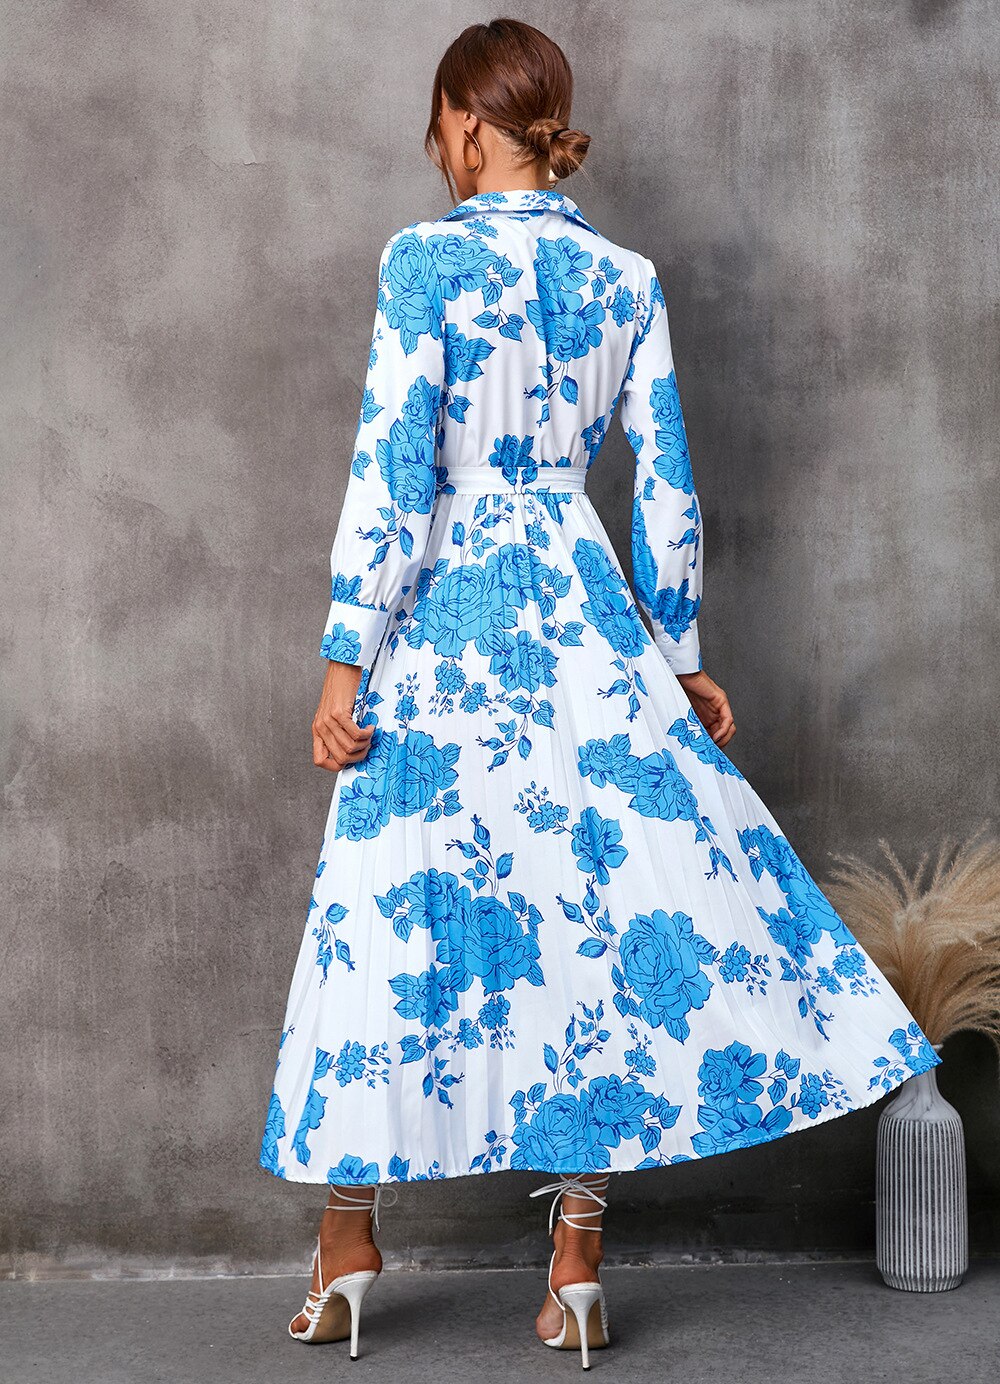 Women Floral Print V-Neck Long Sleeve Dress Casual Lace-up Pleated Mid-Calf Dress - WD8034